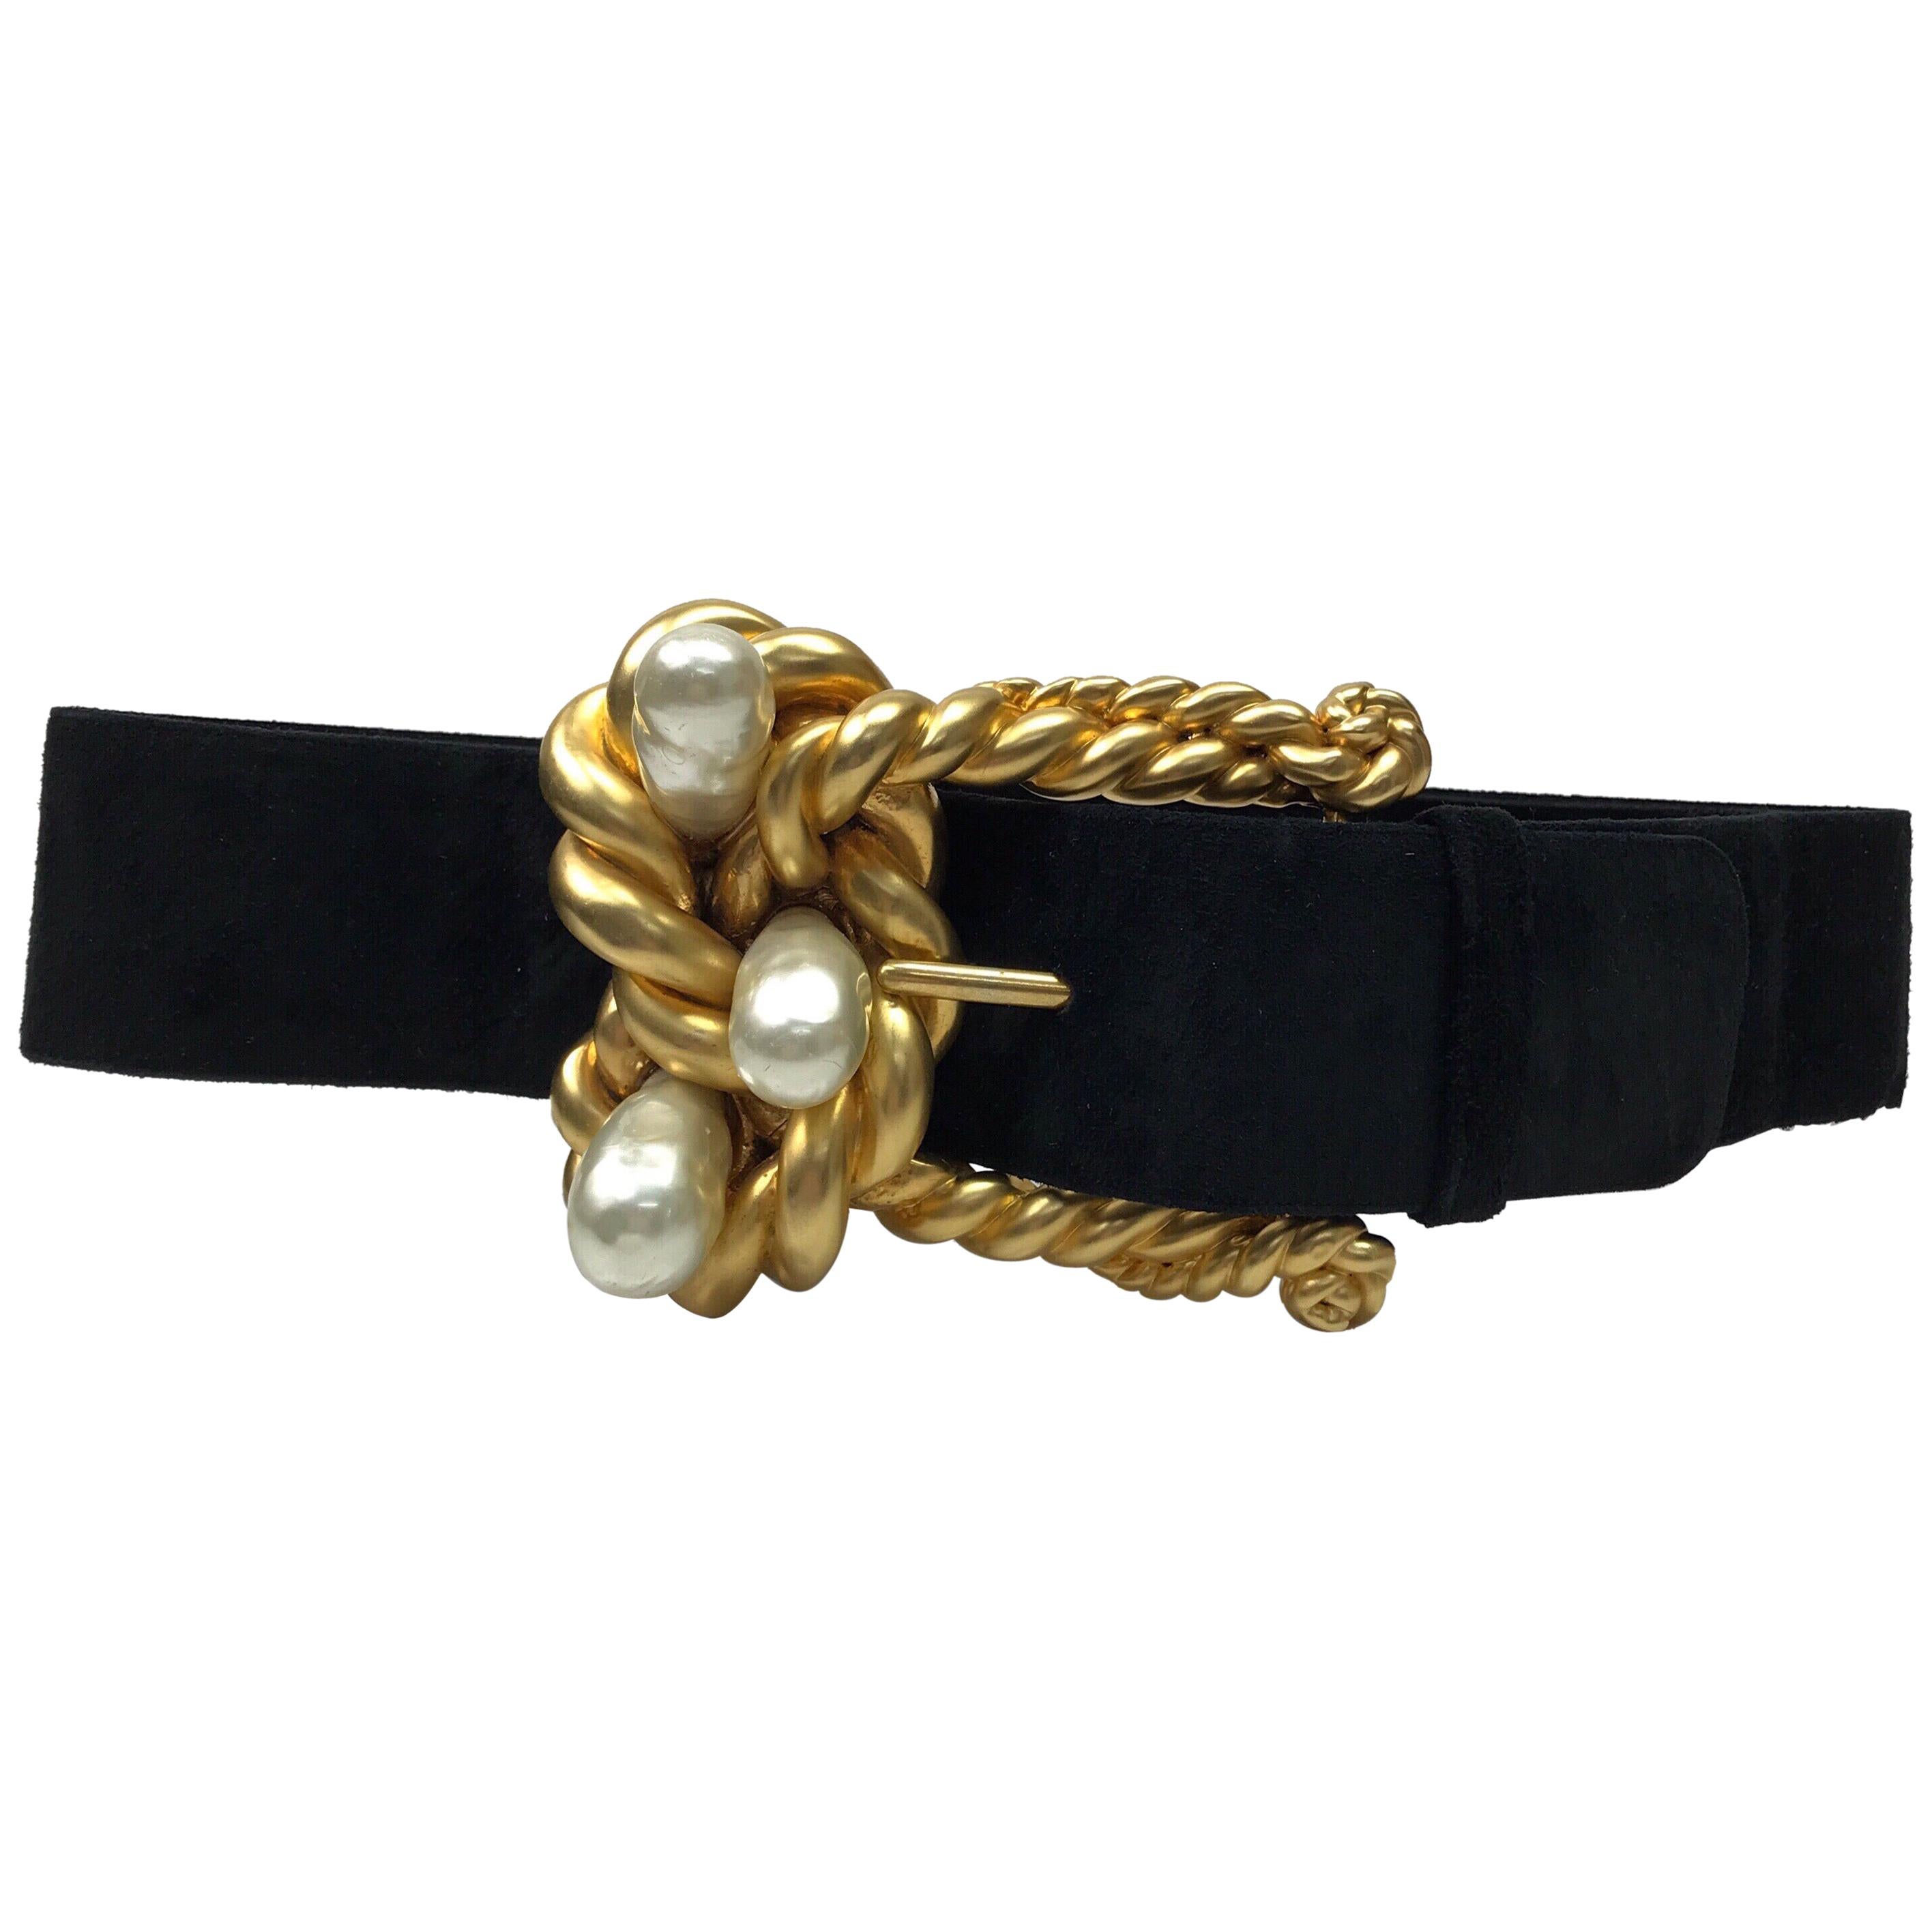 Chanel Black Suede Belt w/ Gold Rope & Pearl Buckle- Circa Late 90's